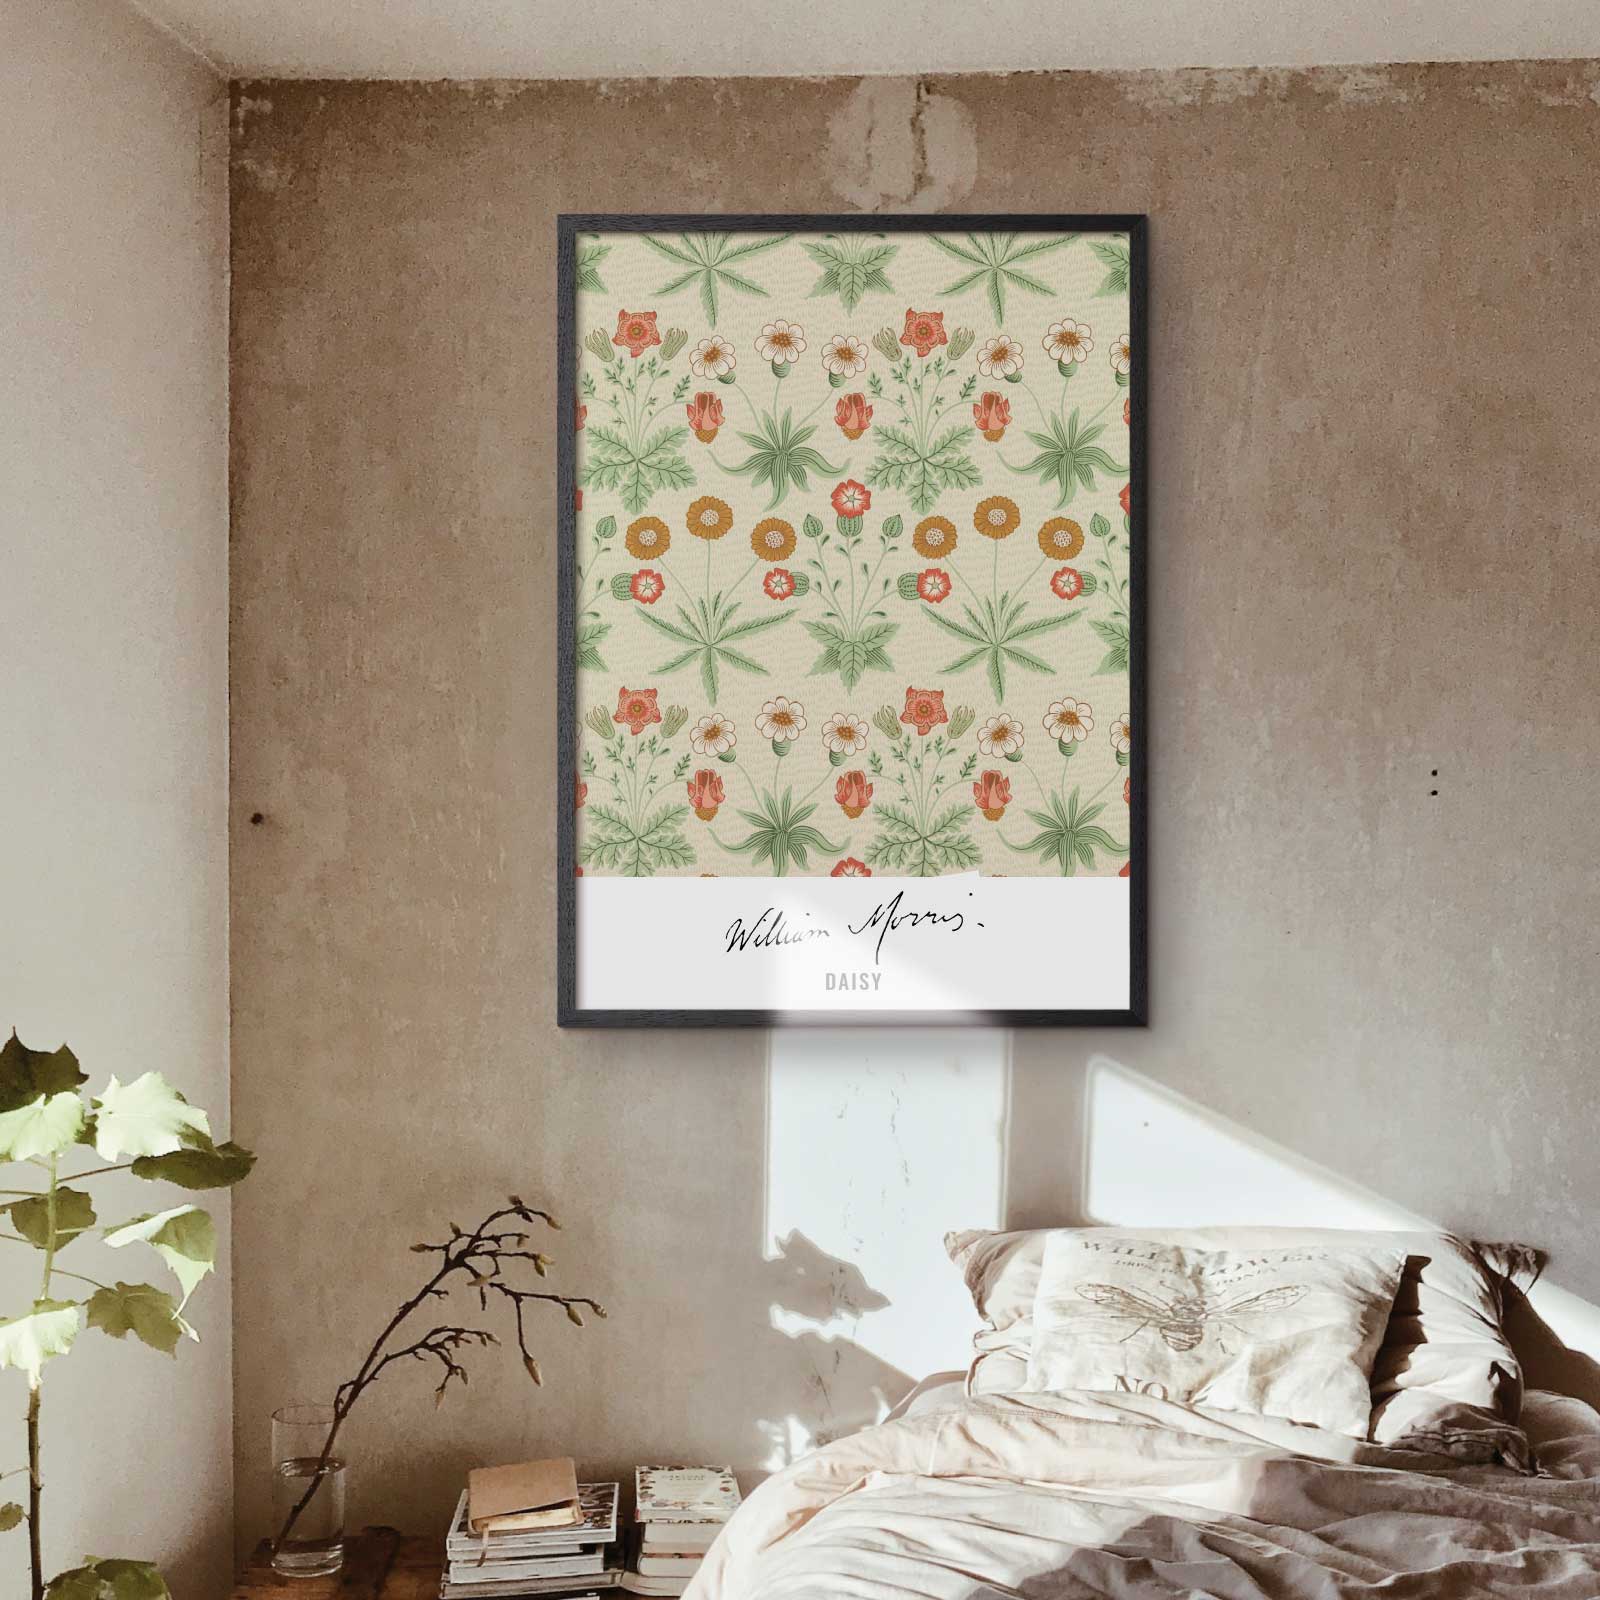 Art poster showing the art called  Daisy" by William Morris